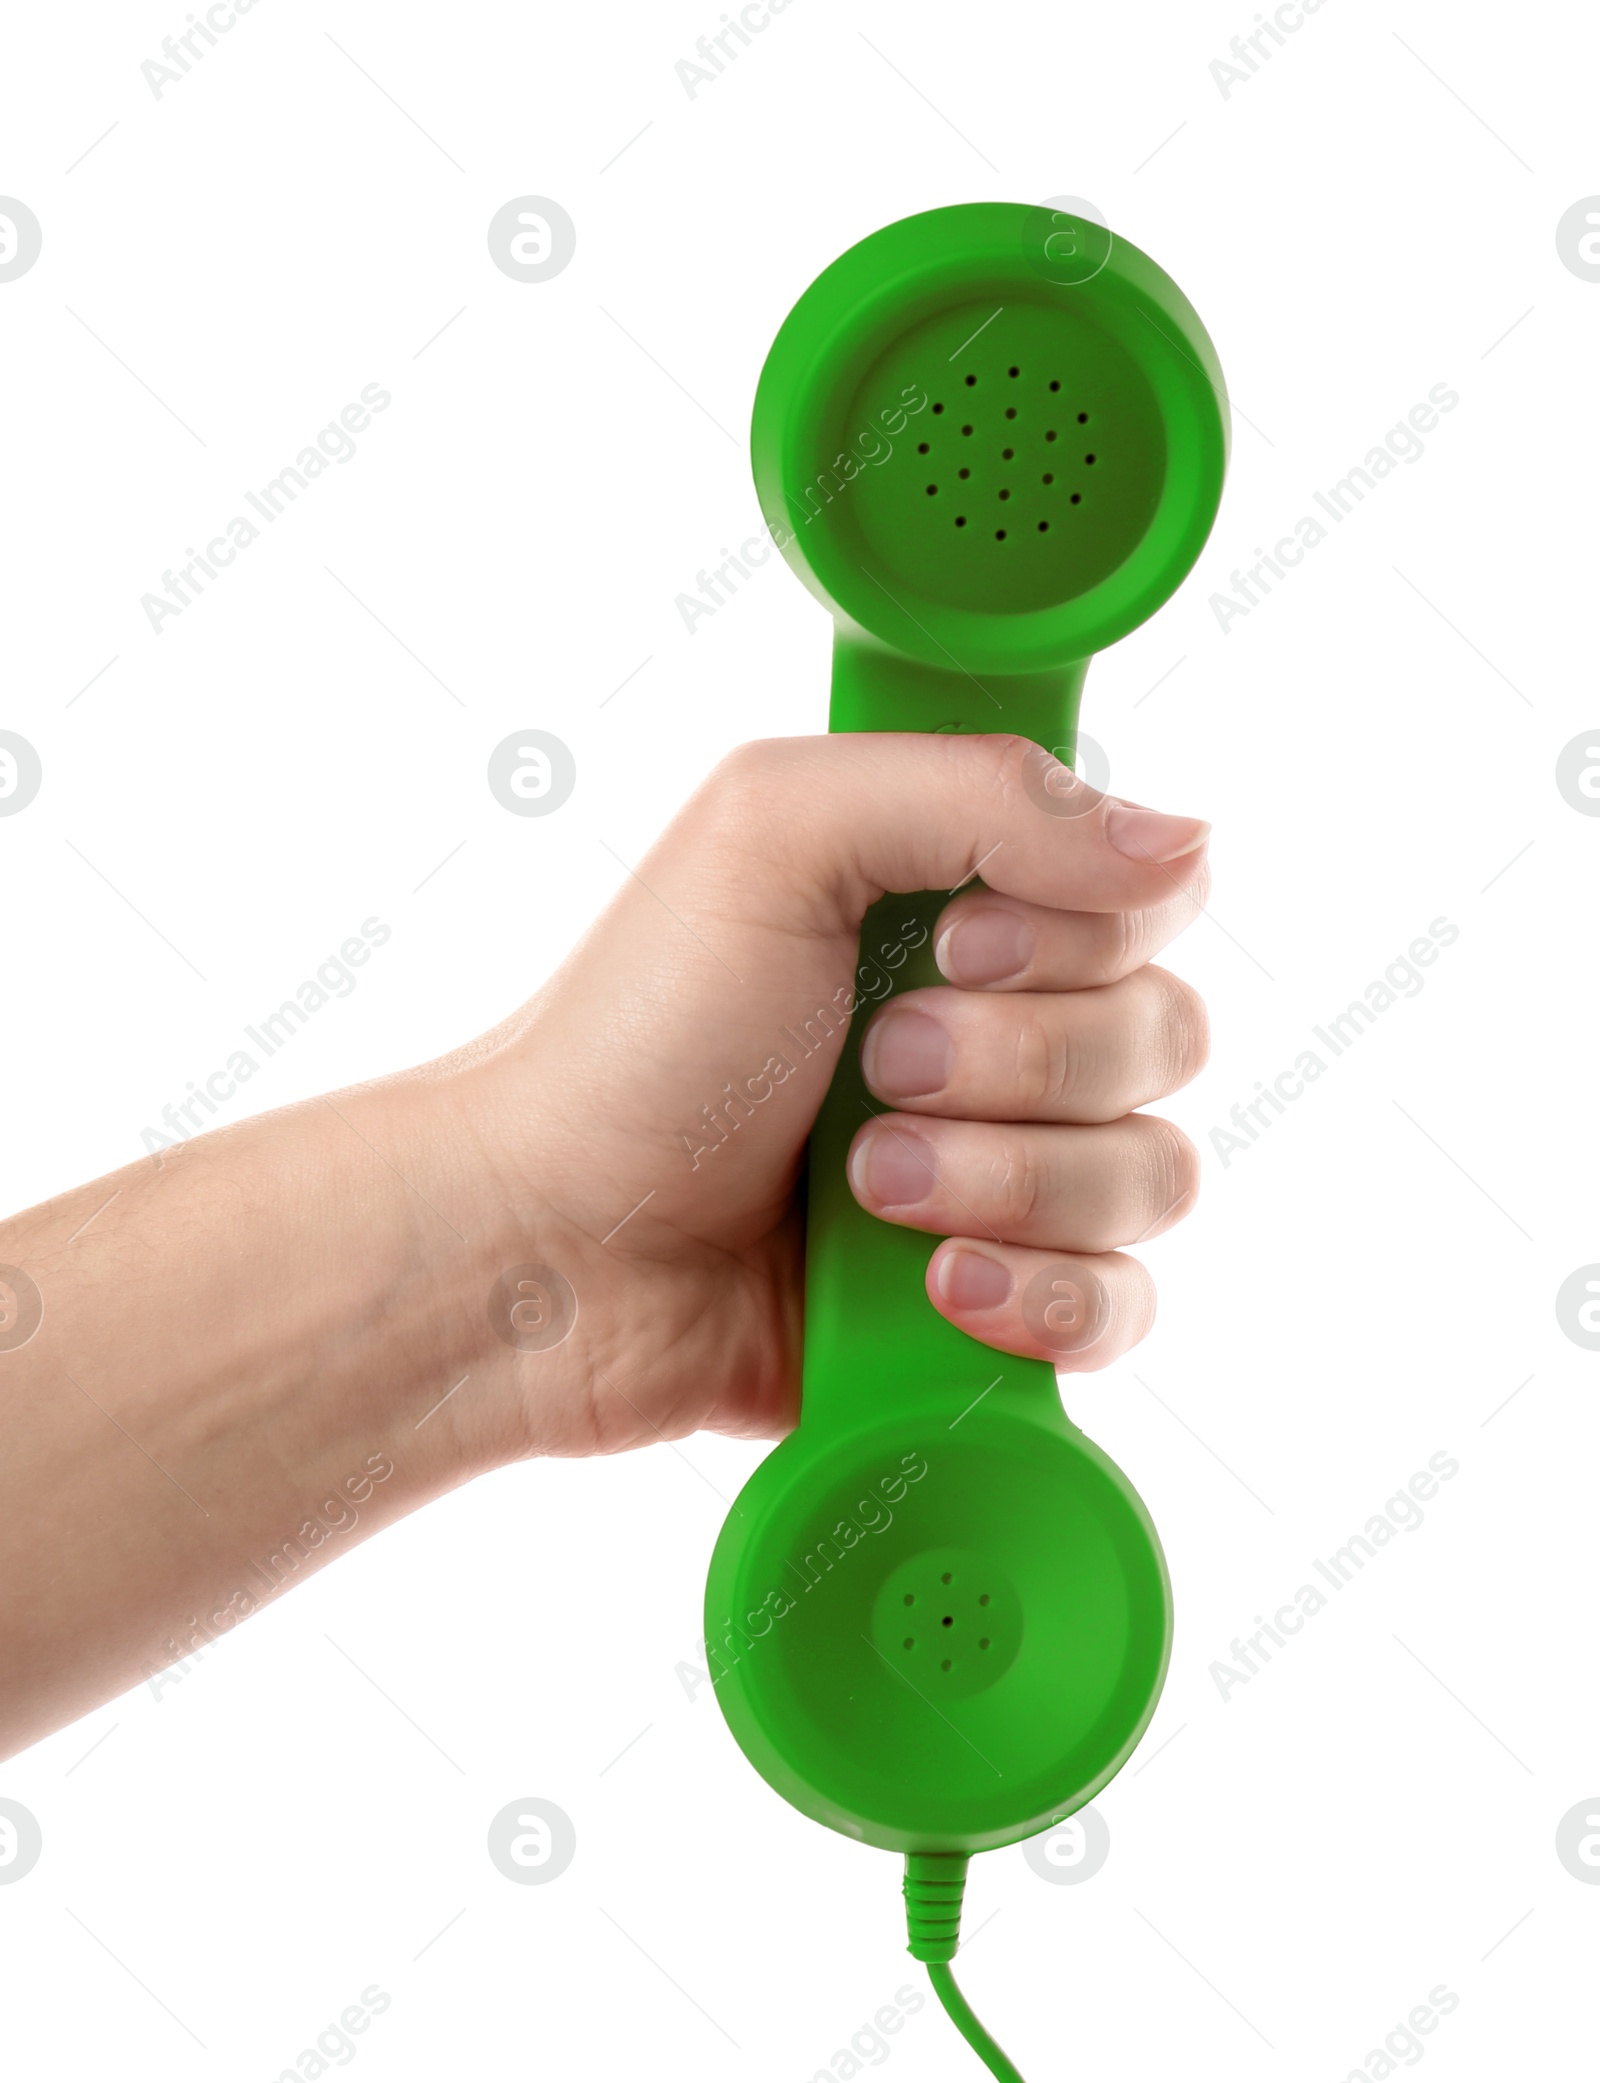 Image of Woman holding green telephone handset on white background, closeup